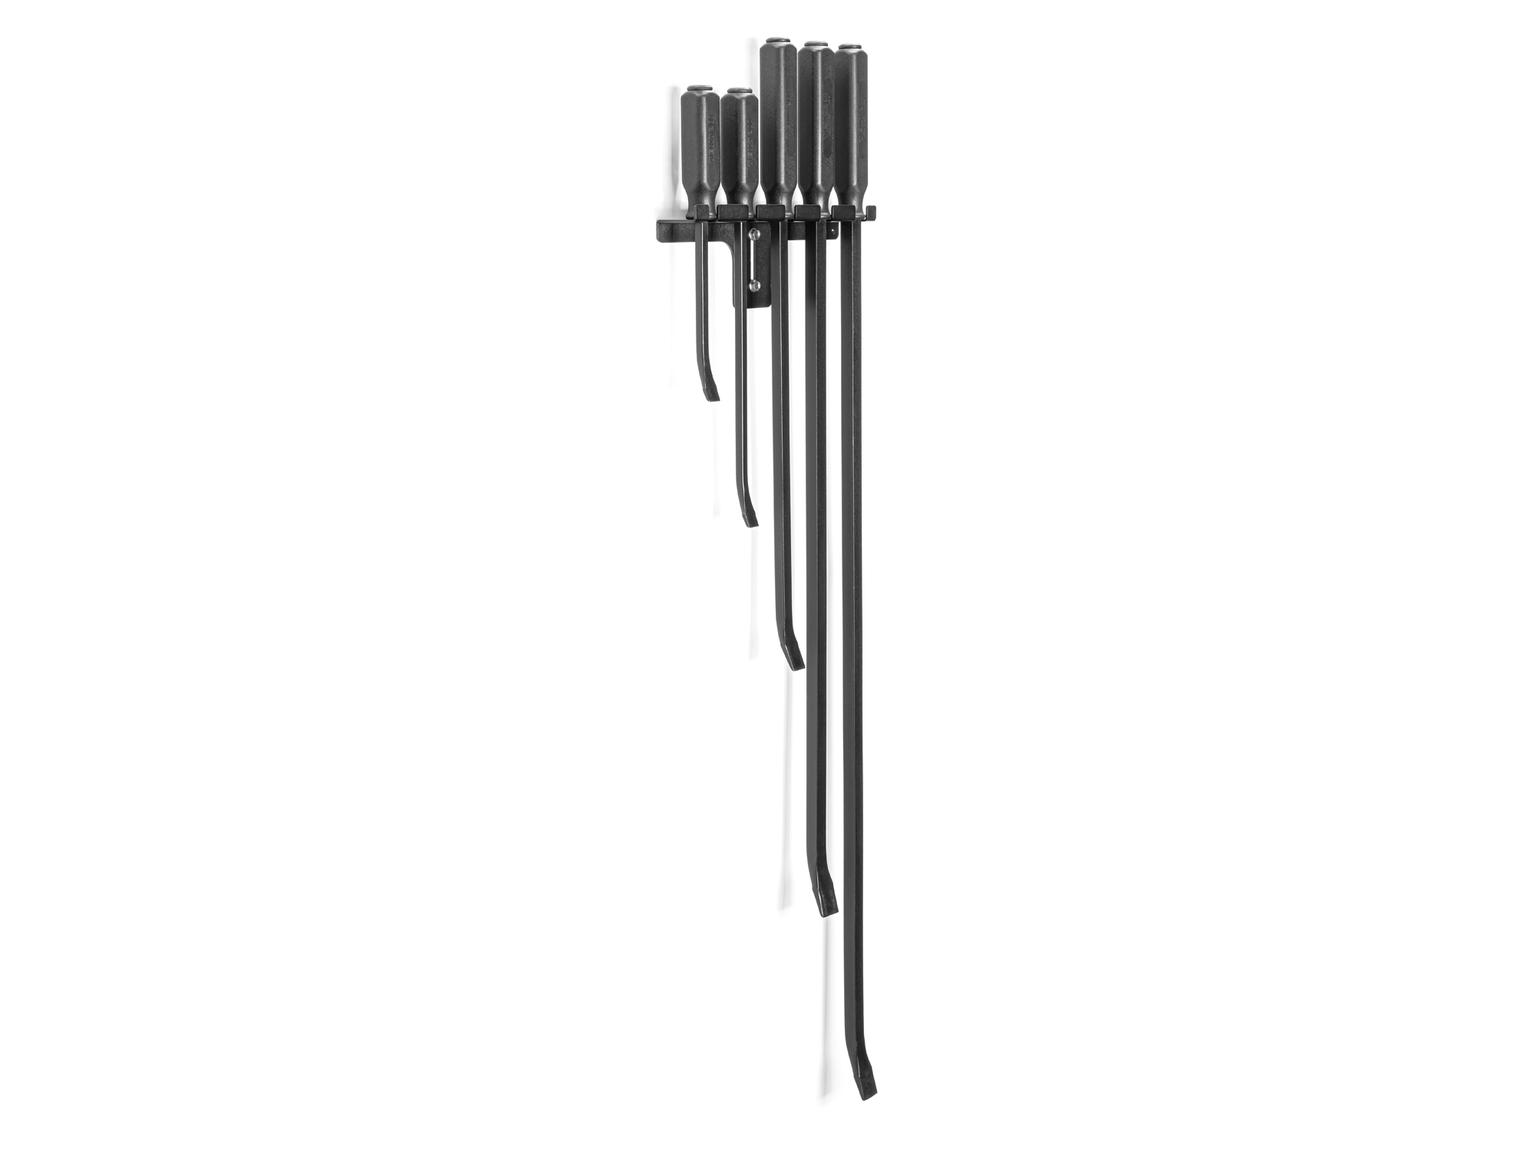 TEKTON LSQ96504-T Angled End Handled Pry Bar Set with Wall Hanger, 5-Piece (12, 17, 25, 36, 45 in.)